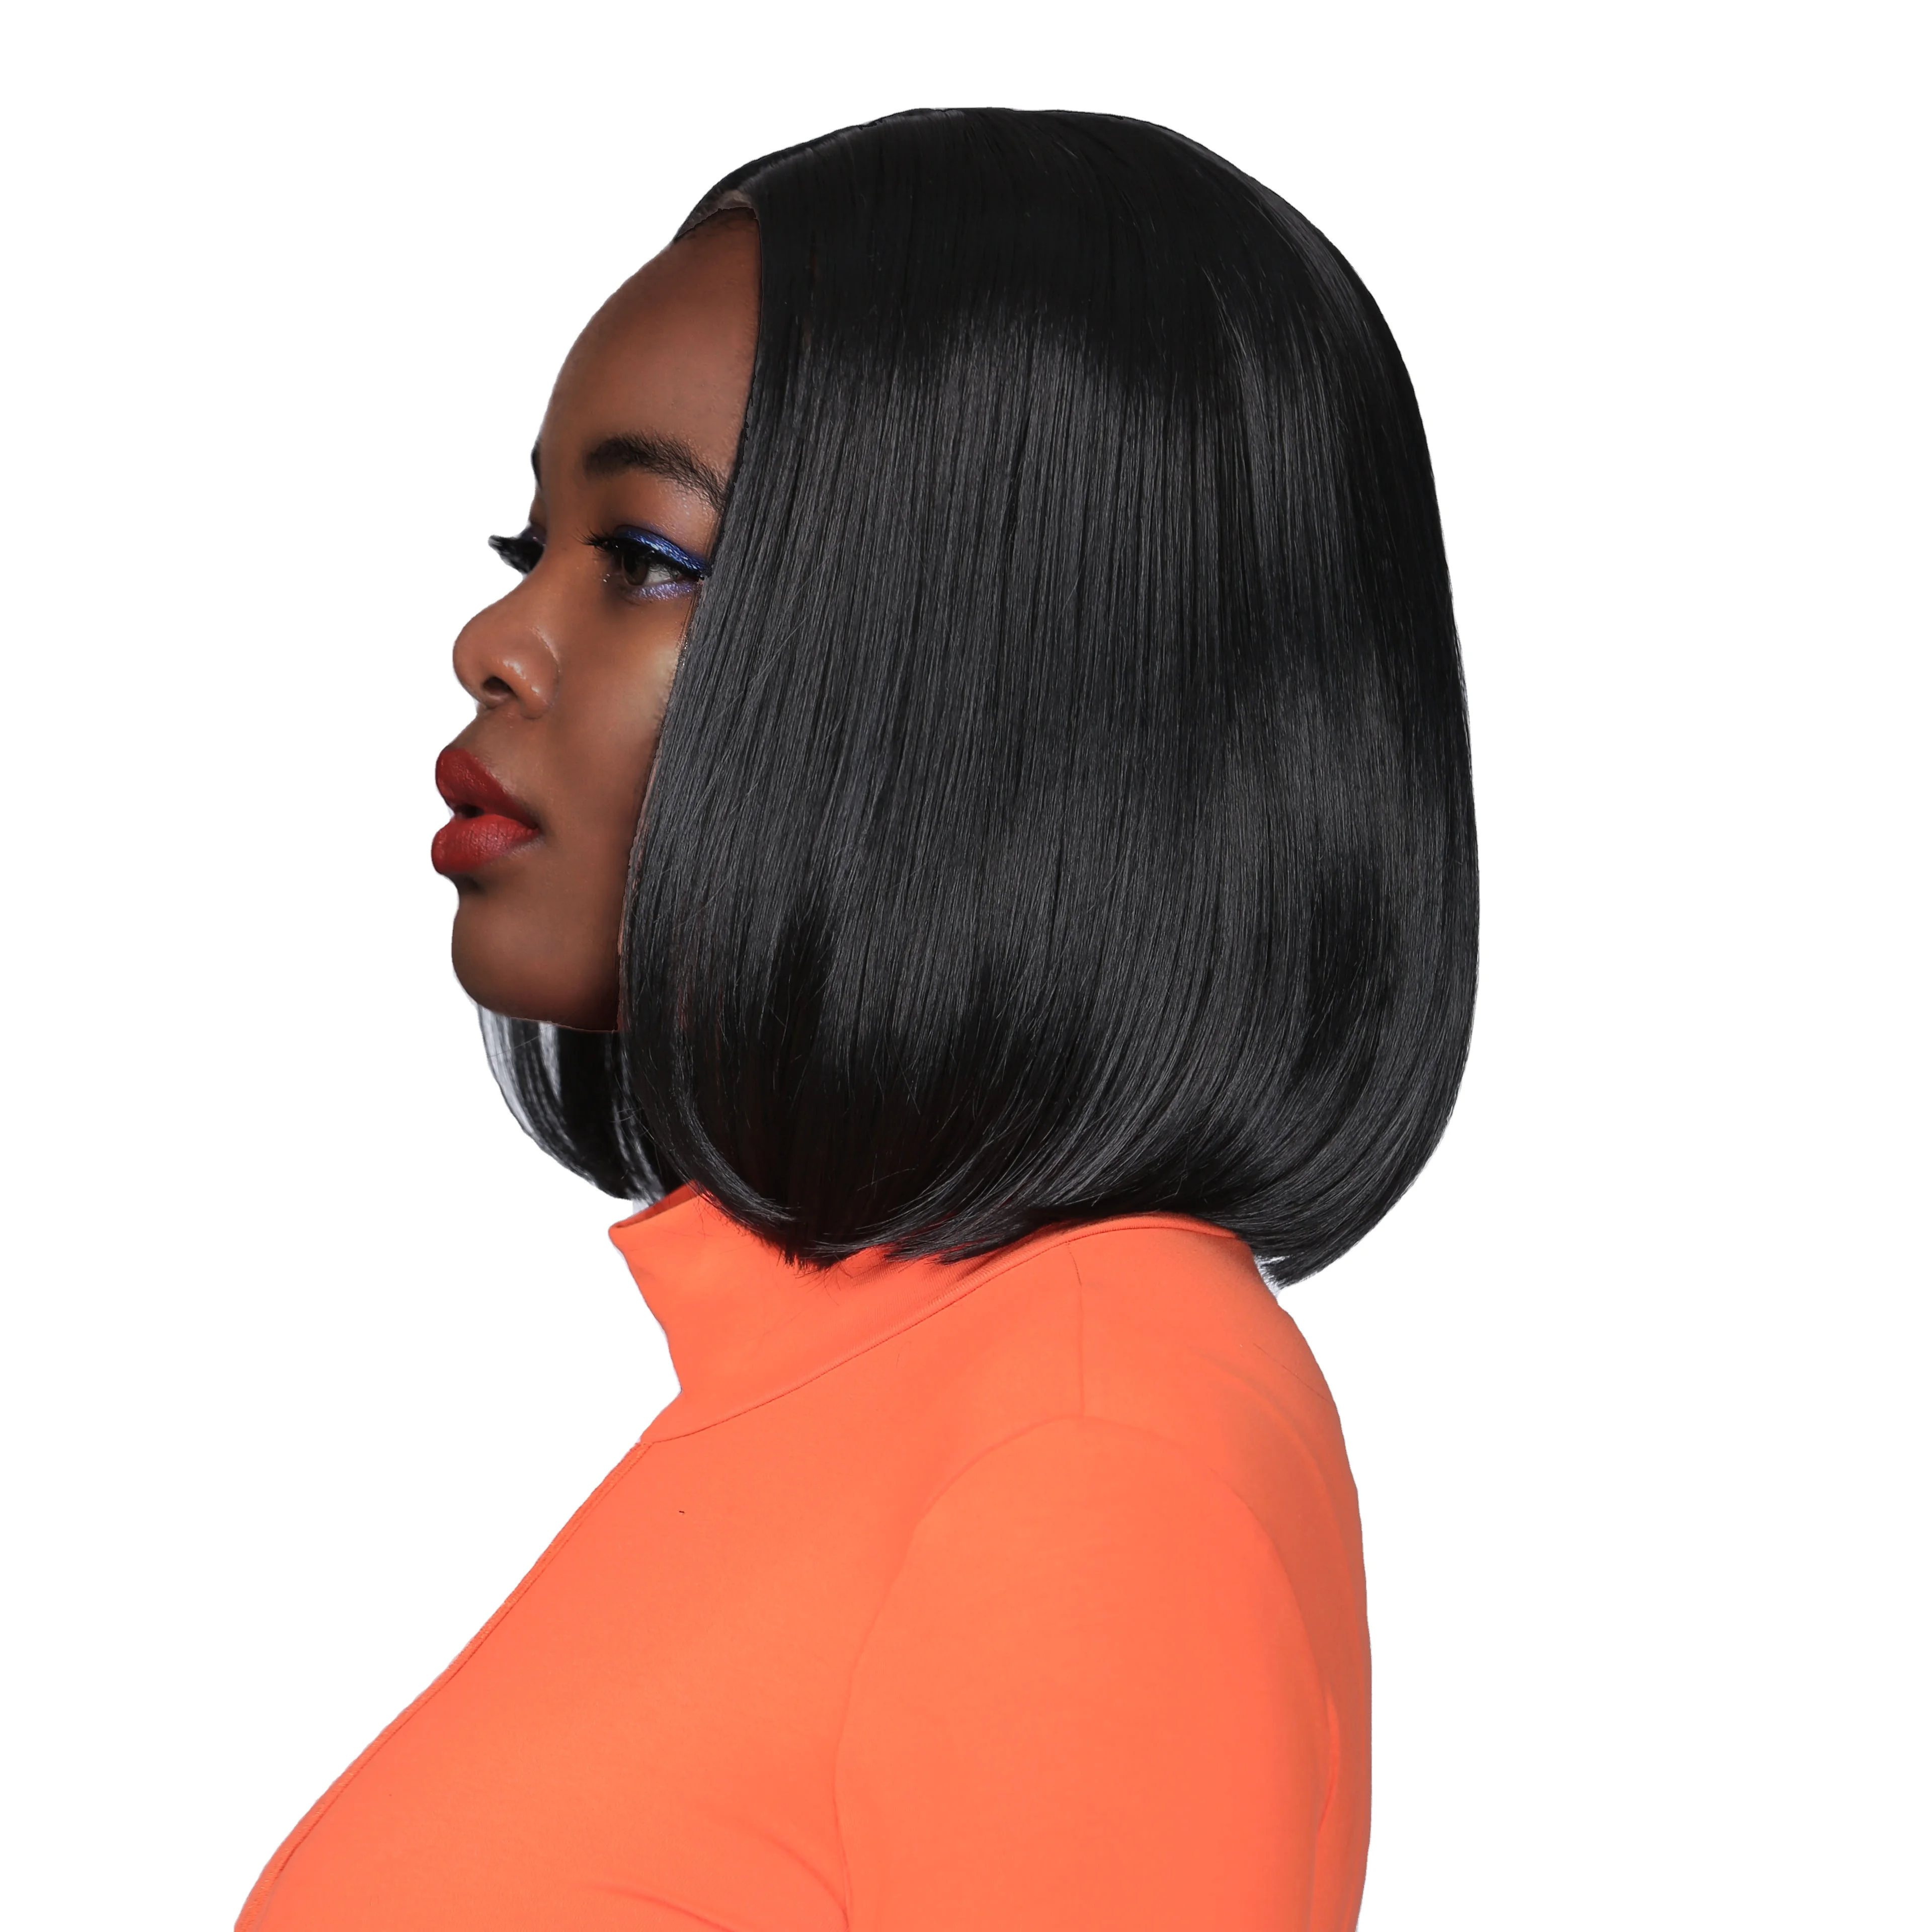 

13" Bob Wigs Short Straight Synthetic Hair Full Wigs for Women Natural Looking Heat Resistant